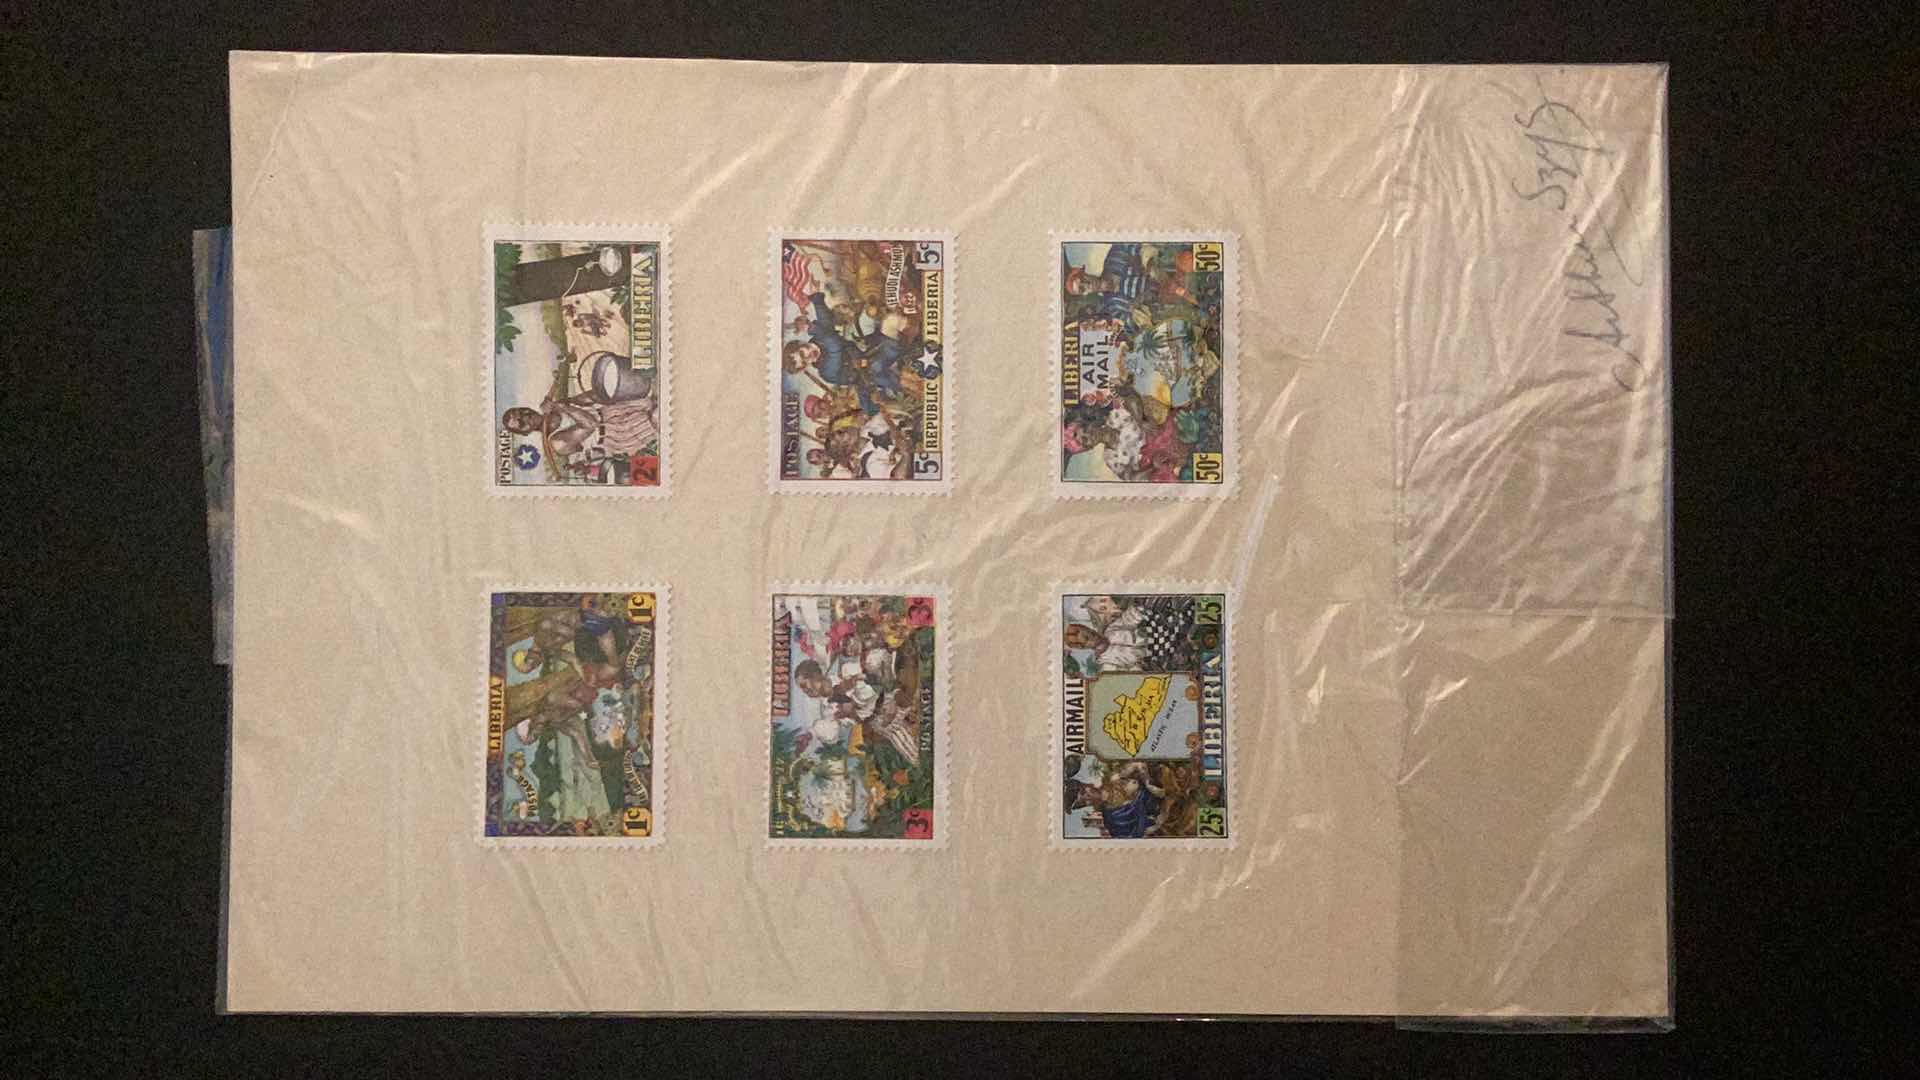 Photo 1 of LIBERIA SET OF SIX MINT STAMPS SIGNED BY THE ARTIST